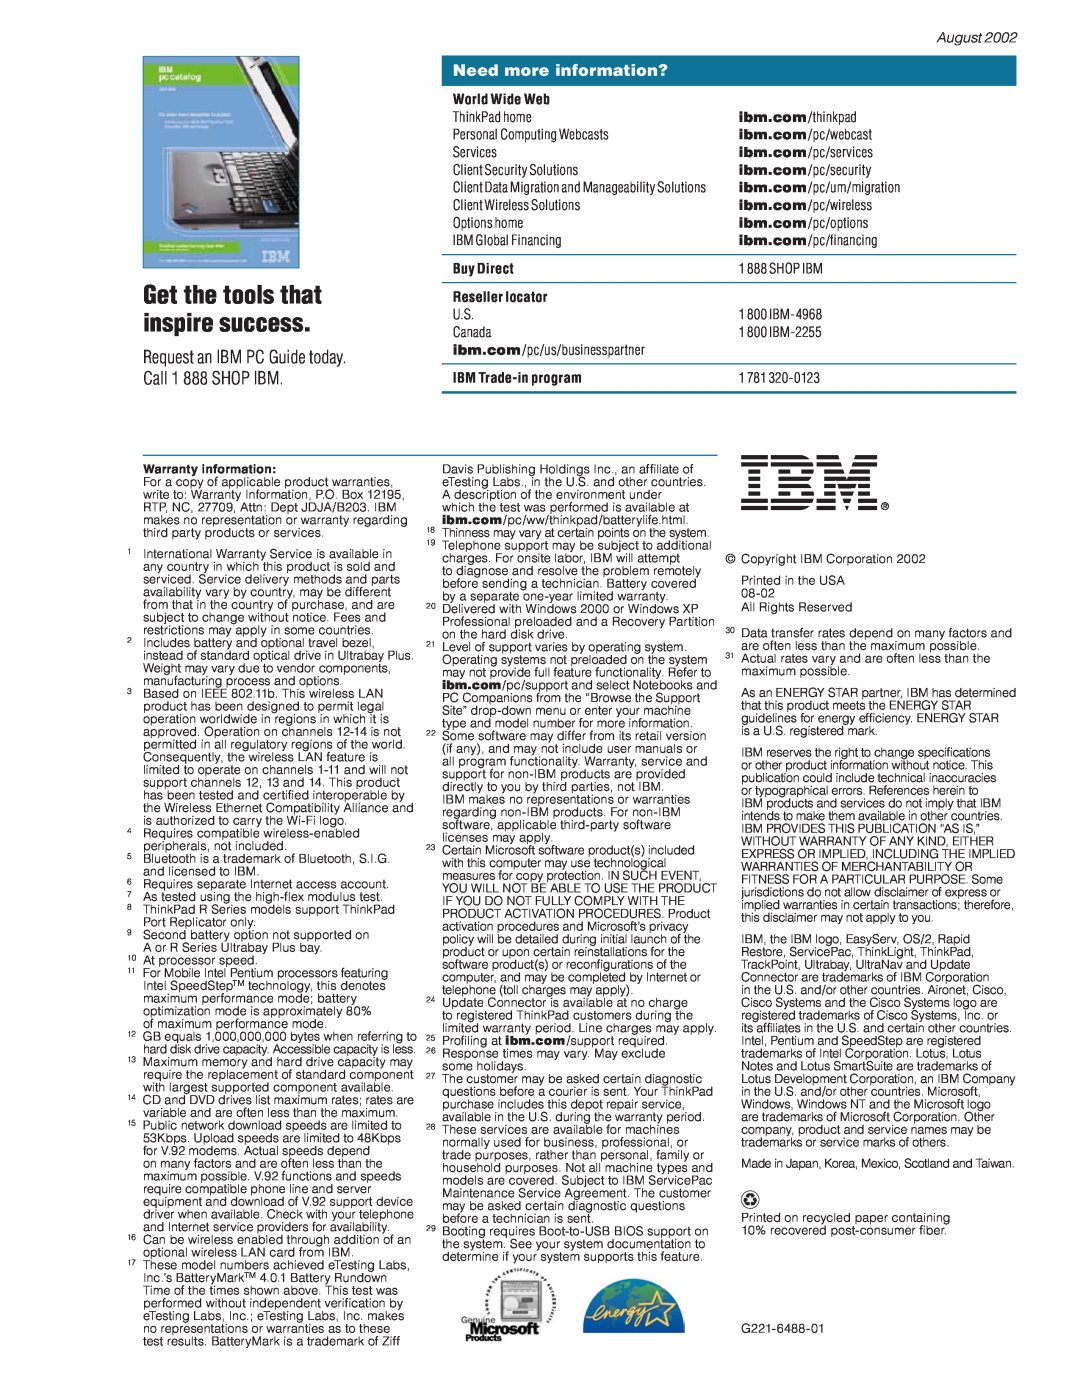 IBM T30 Request an IBM PC Guide today. Call 1 888 SHOP IBM, Need more information?, Get the tools that inspire success 